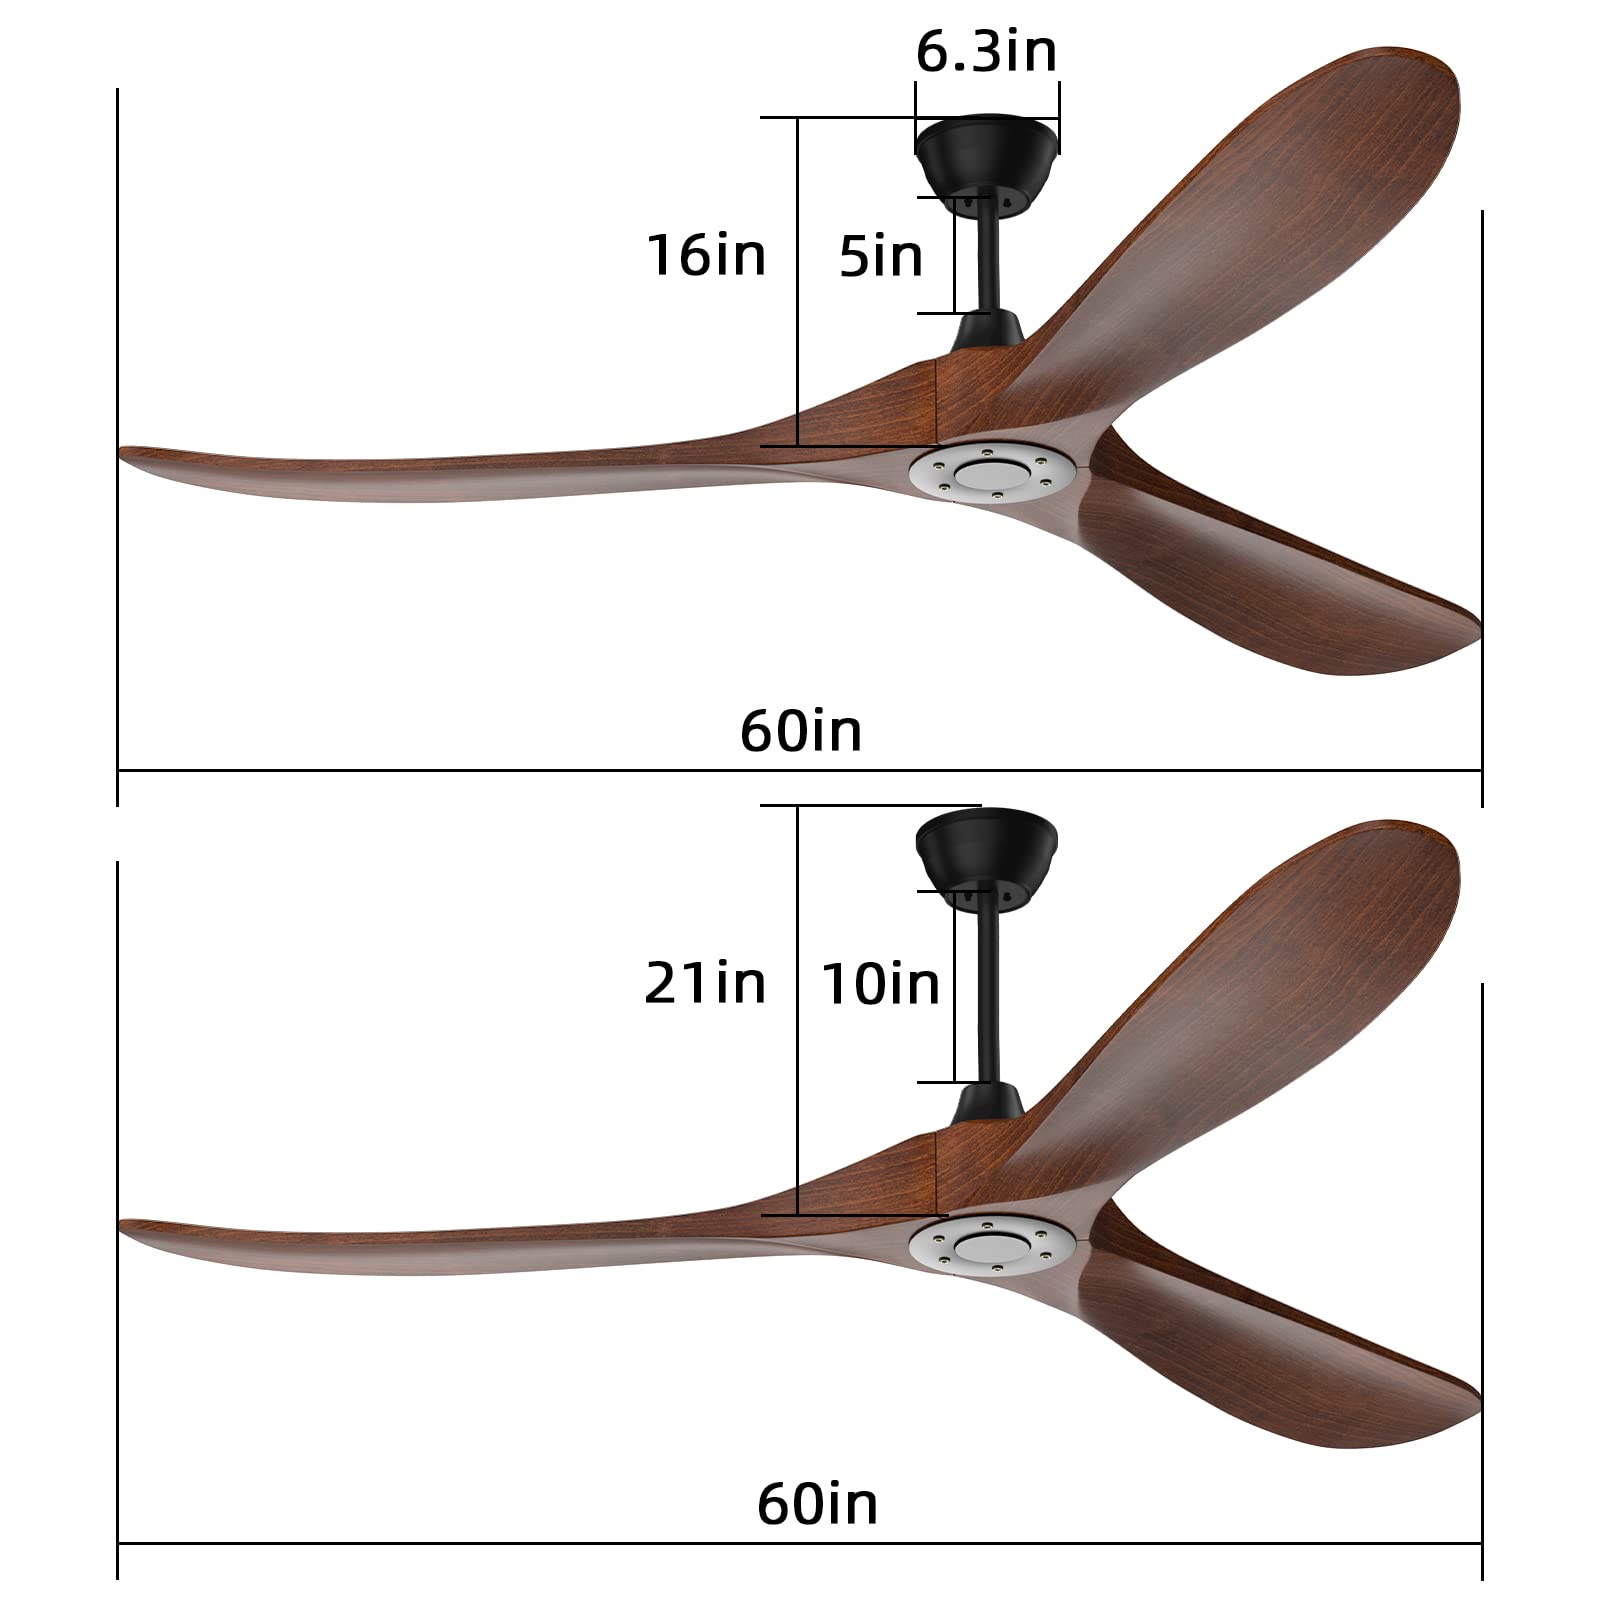 Obabala 60'' Outdoor Ceiling Fan with Remote Control, 3 Balsa Wood Blades, Matte Black, Reversible DC Motor Quiet Energysaving, for Bedroom Patios Kitchen Farmhouse, Indoor/Outdoor Ceiling Fan